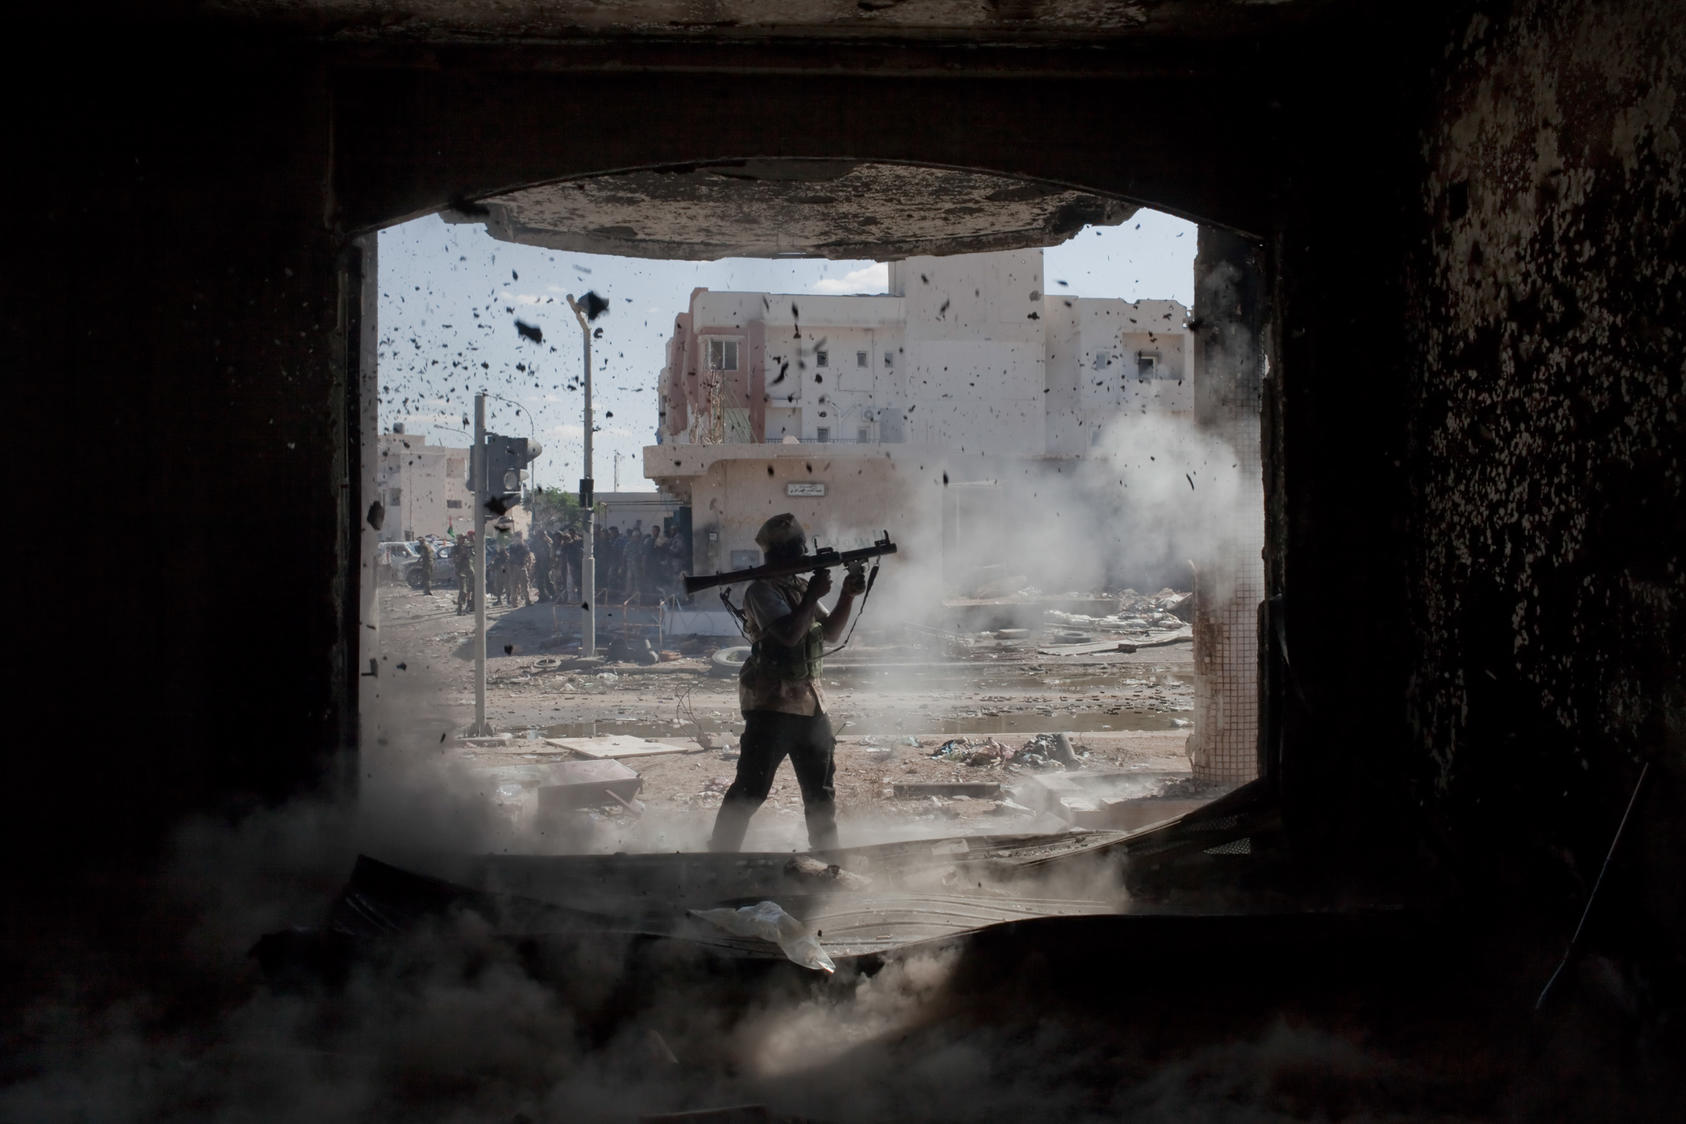 An anti-Gadhafi fighter fires a rocket-propelled grenade during fighting in Sirte, Libya.